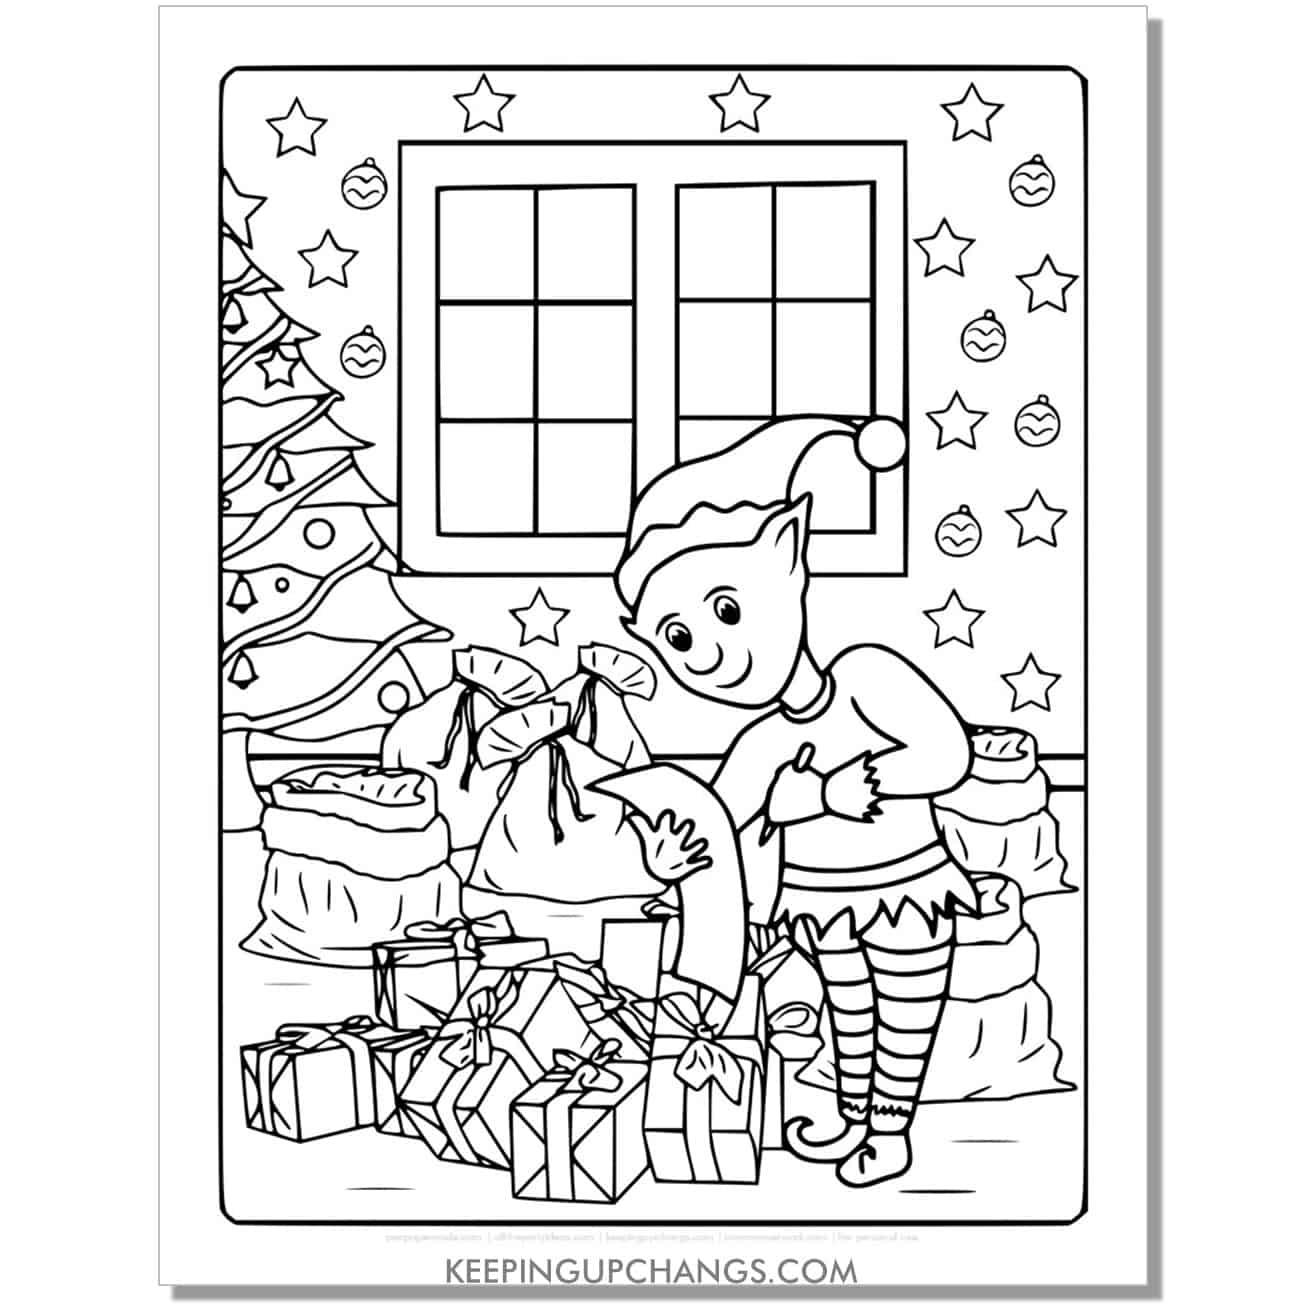 free elf with list of boys and girls full size coloring page.